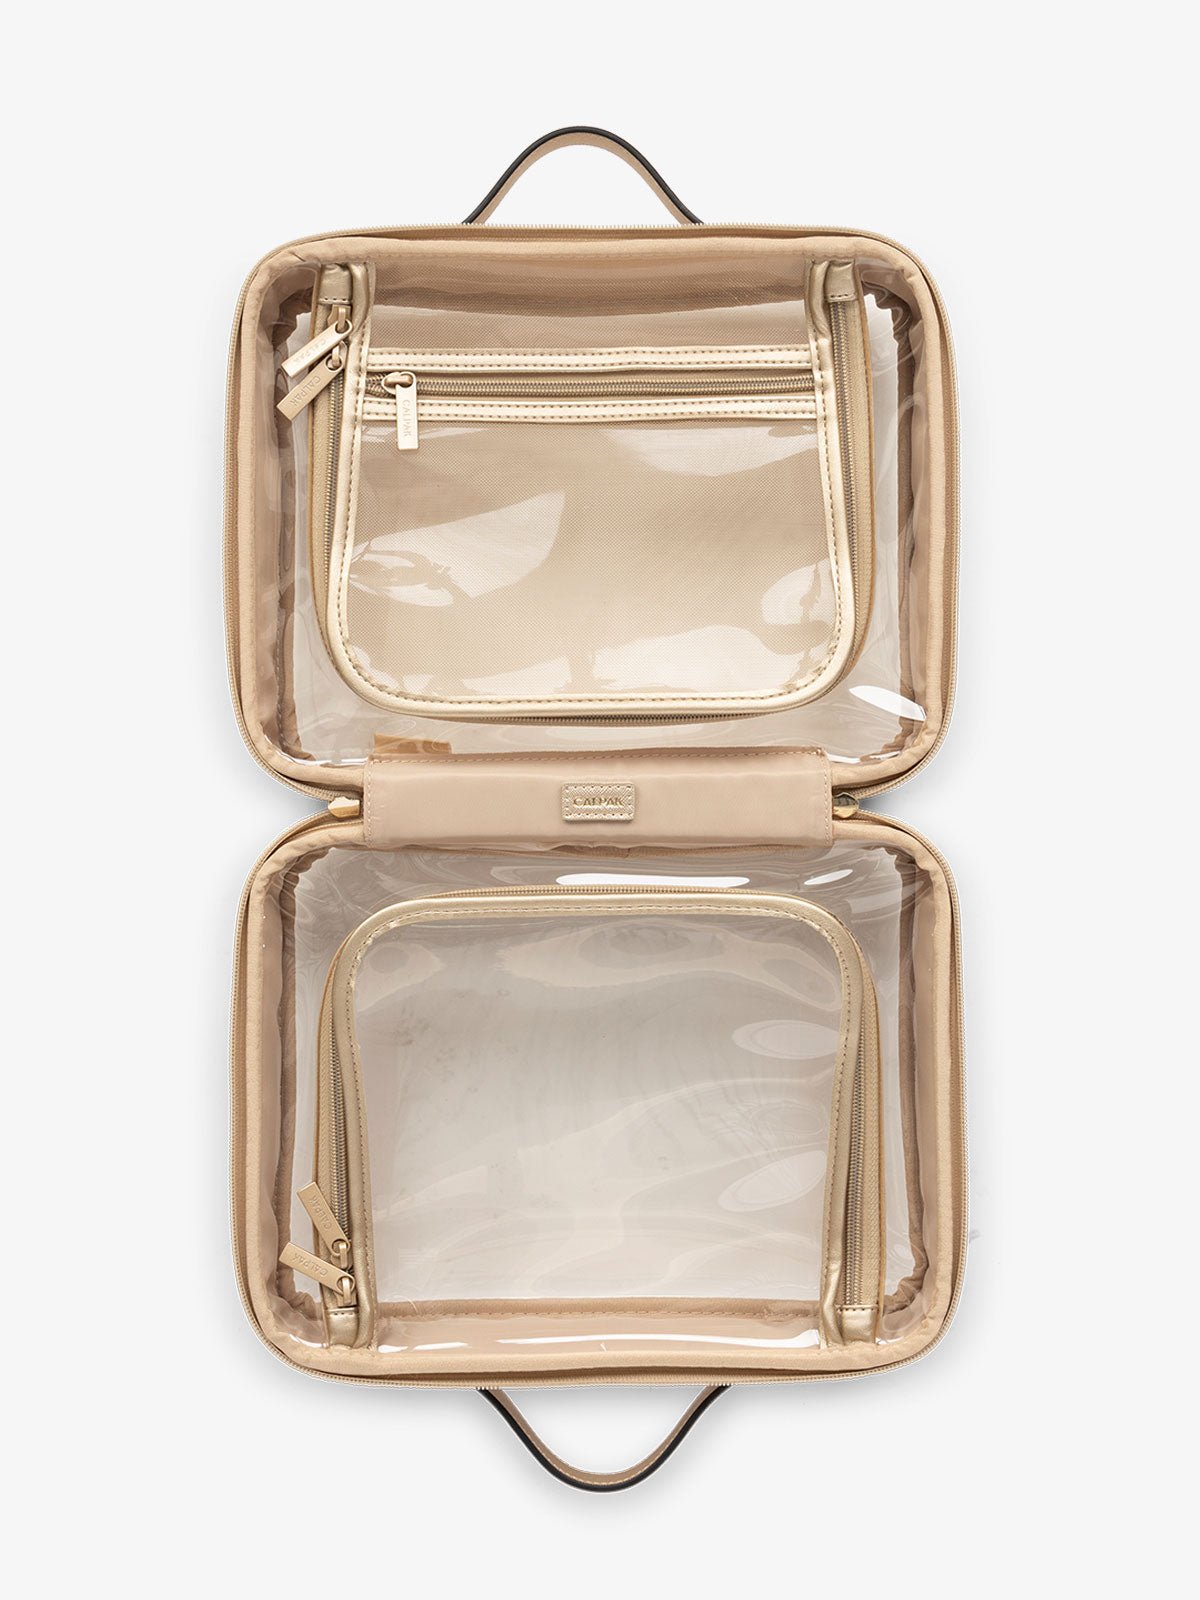 CALPAK large transparent water resistant travel makeup bag with compartments in shiny gold